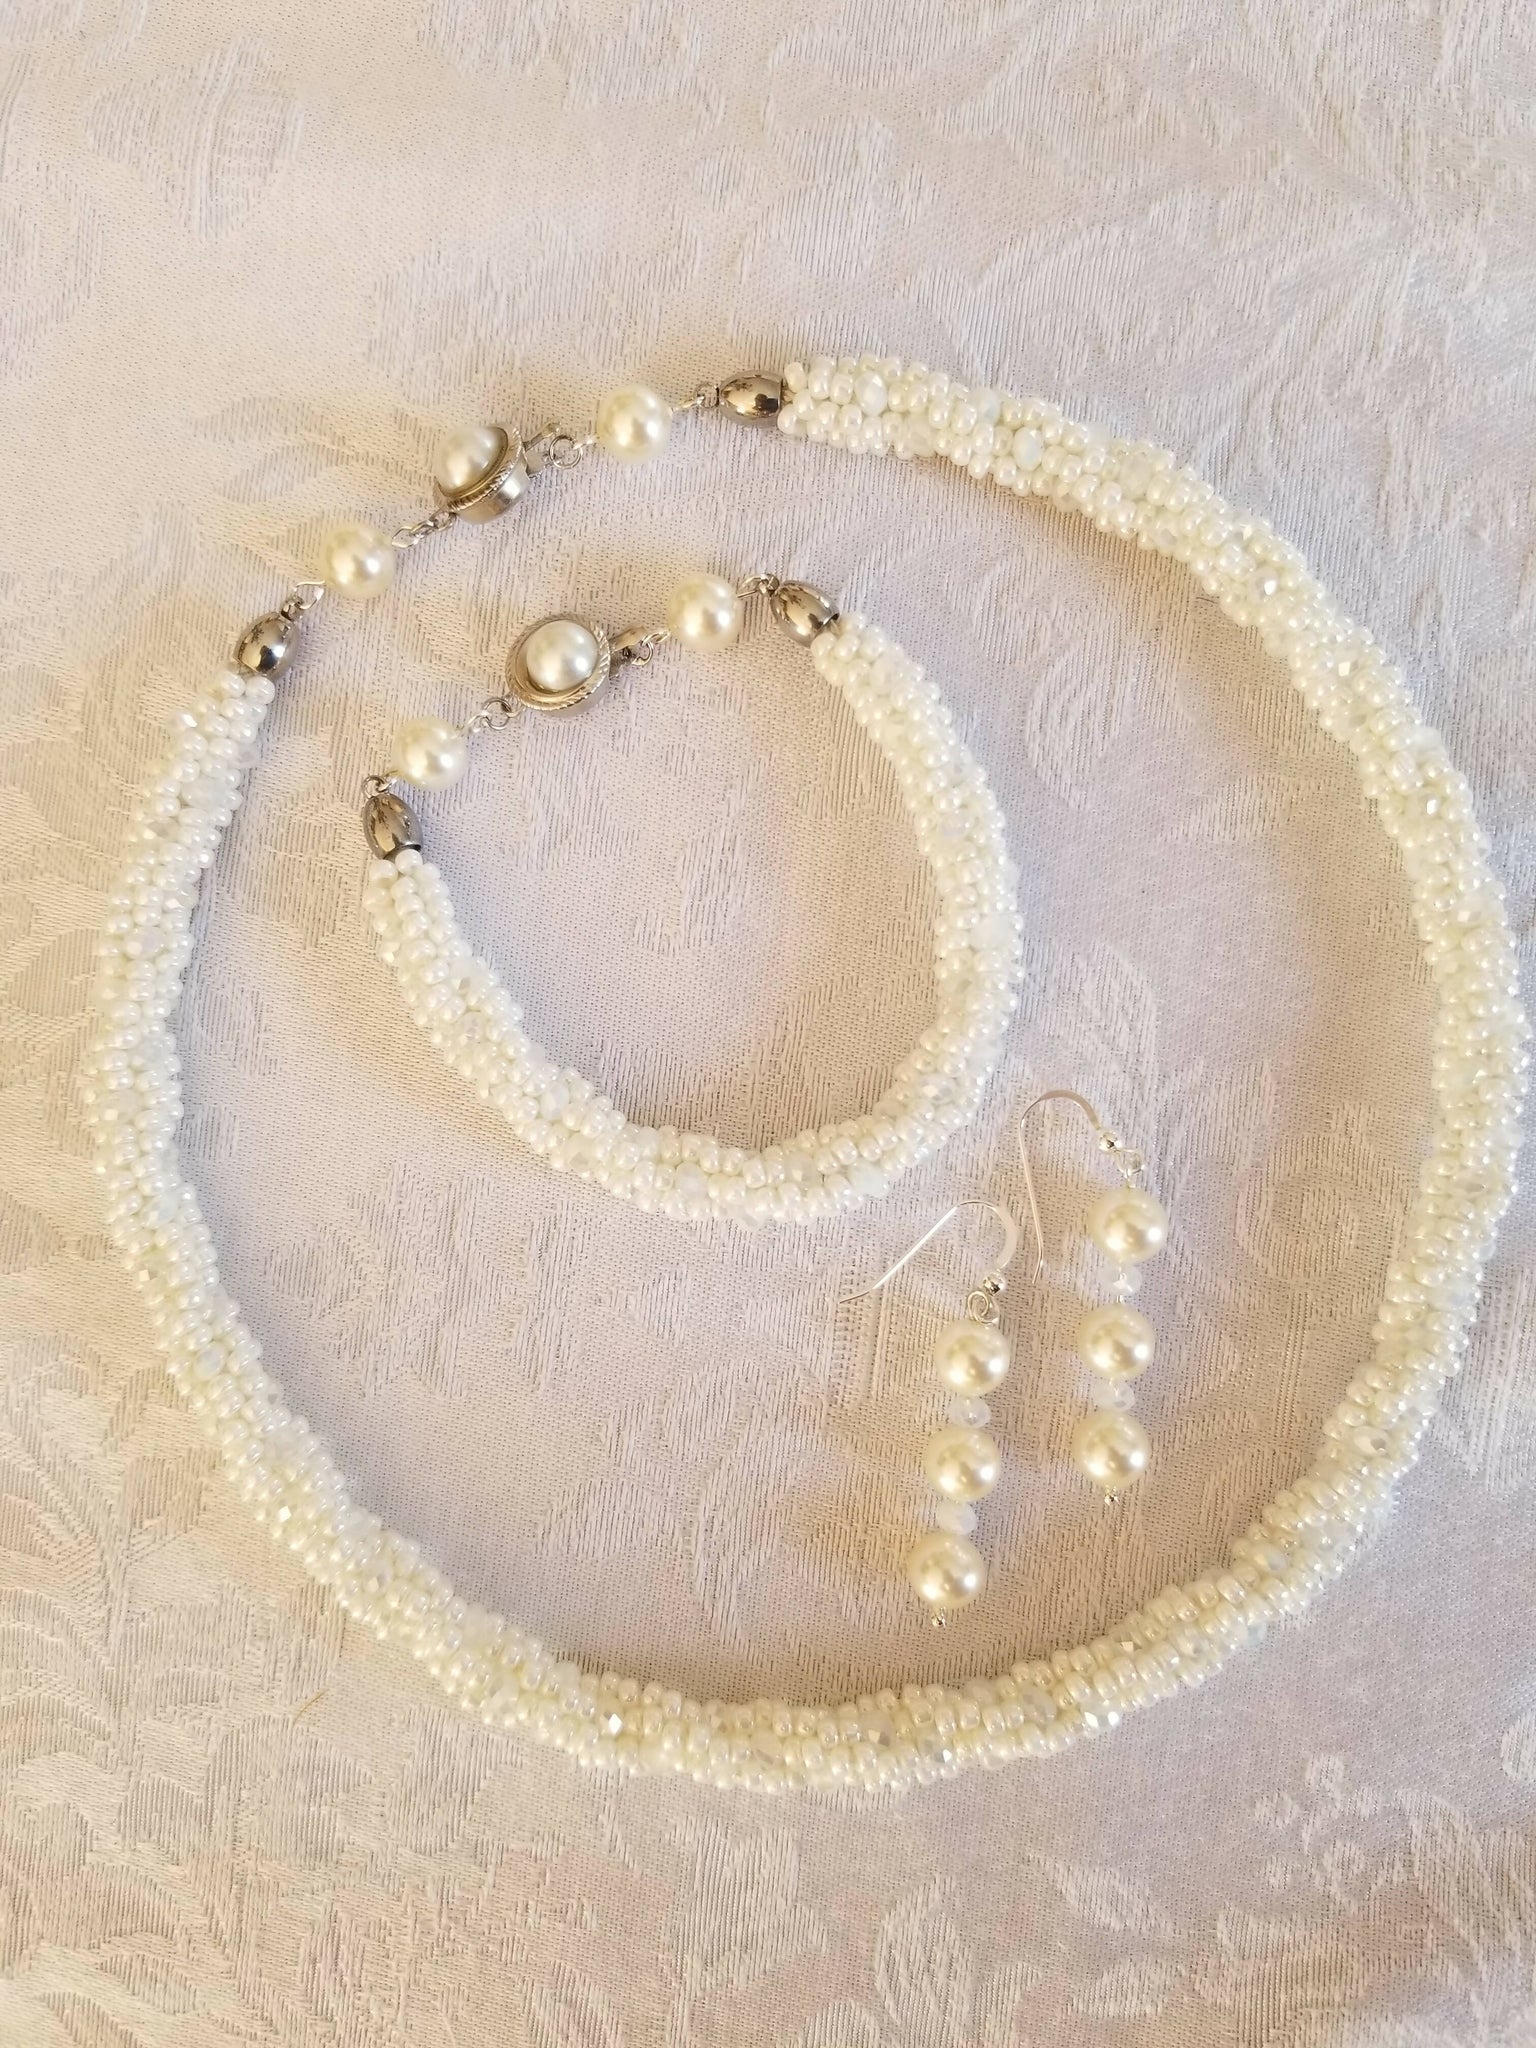 Ivory and Crystal Glass Bead Kumihimo Necklace and Bracelet with Earrings